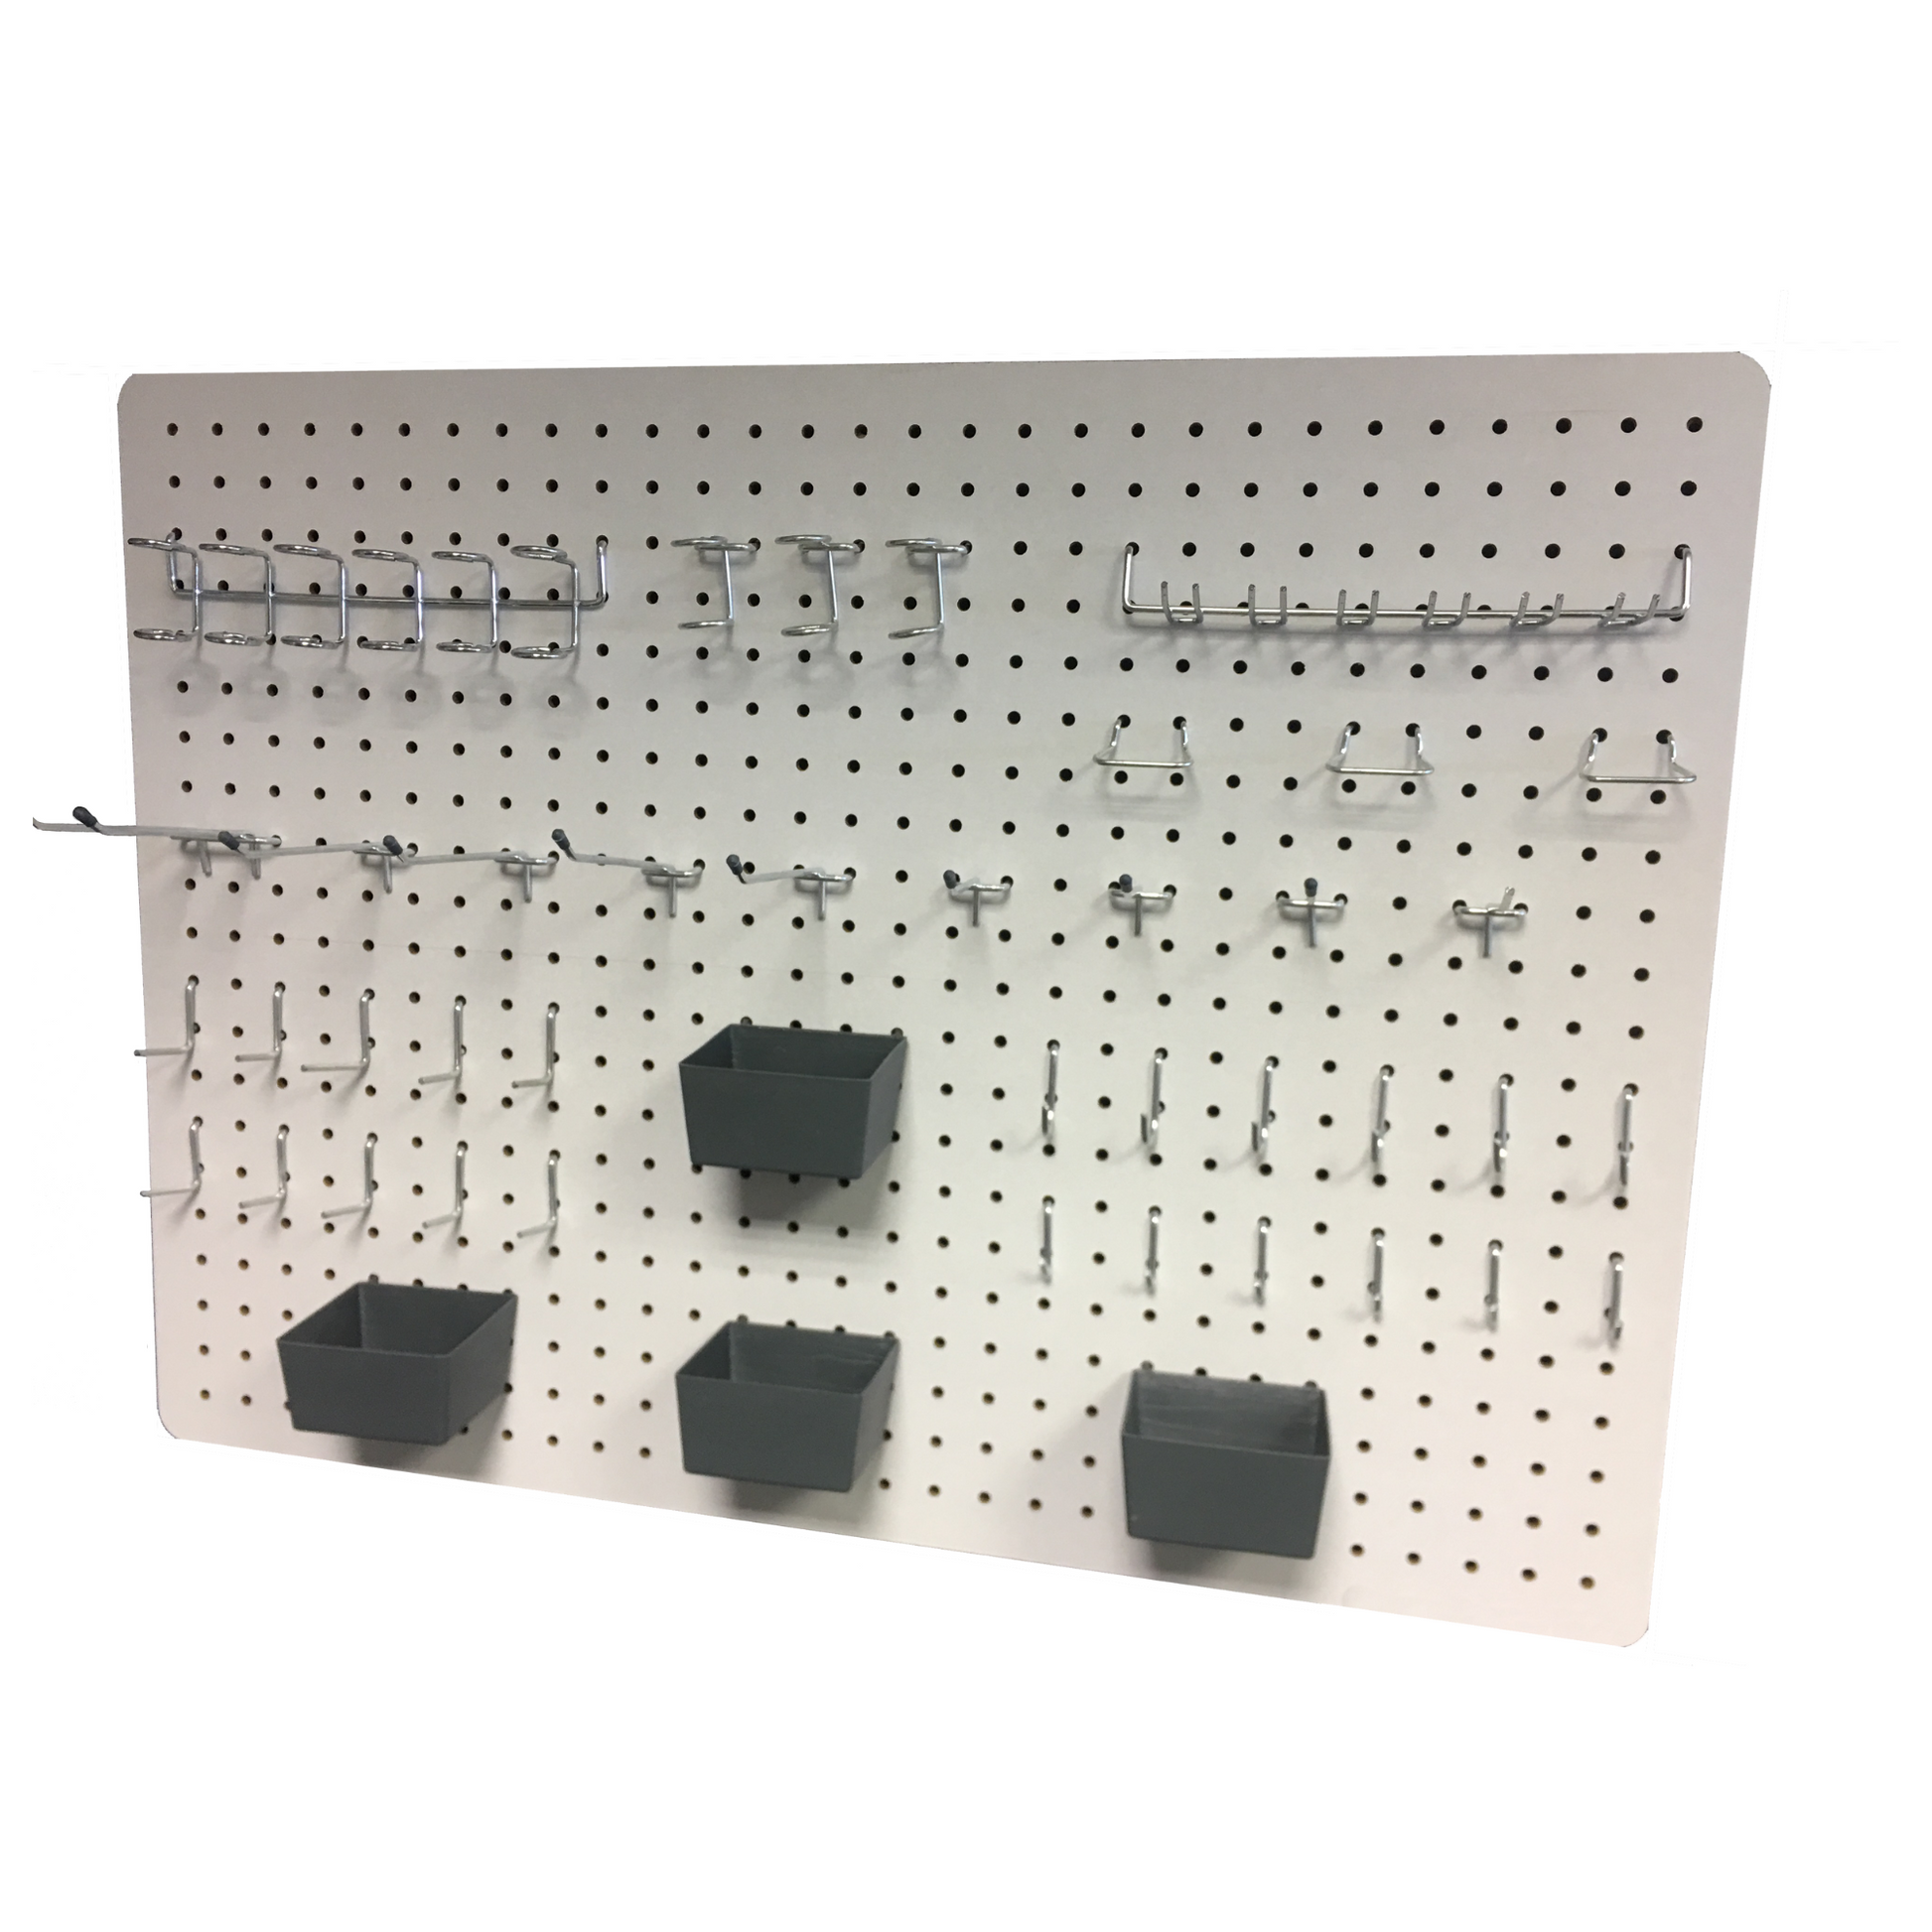 White pegboard equipped with various metal hooks and three grey plastic bins, showcasing an organized pegboard ready to be used for storage.